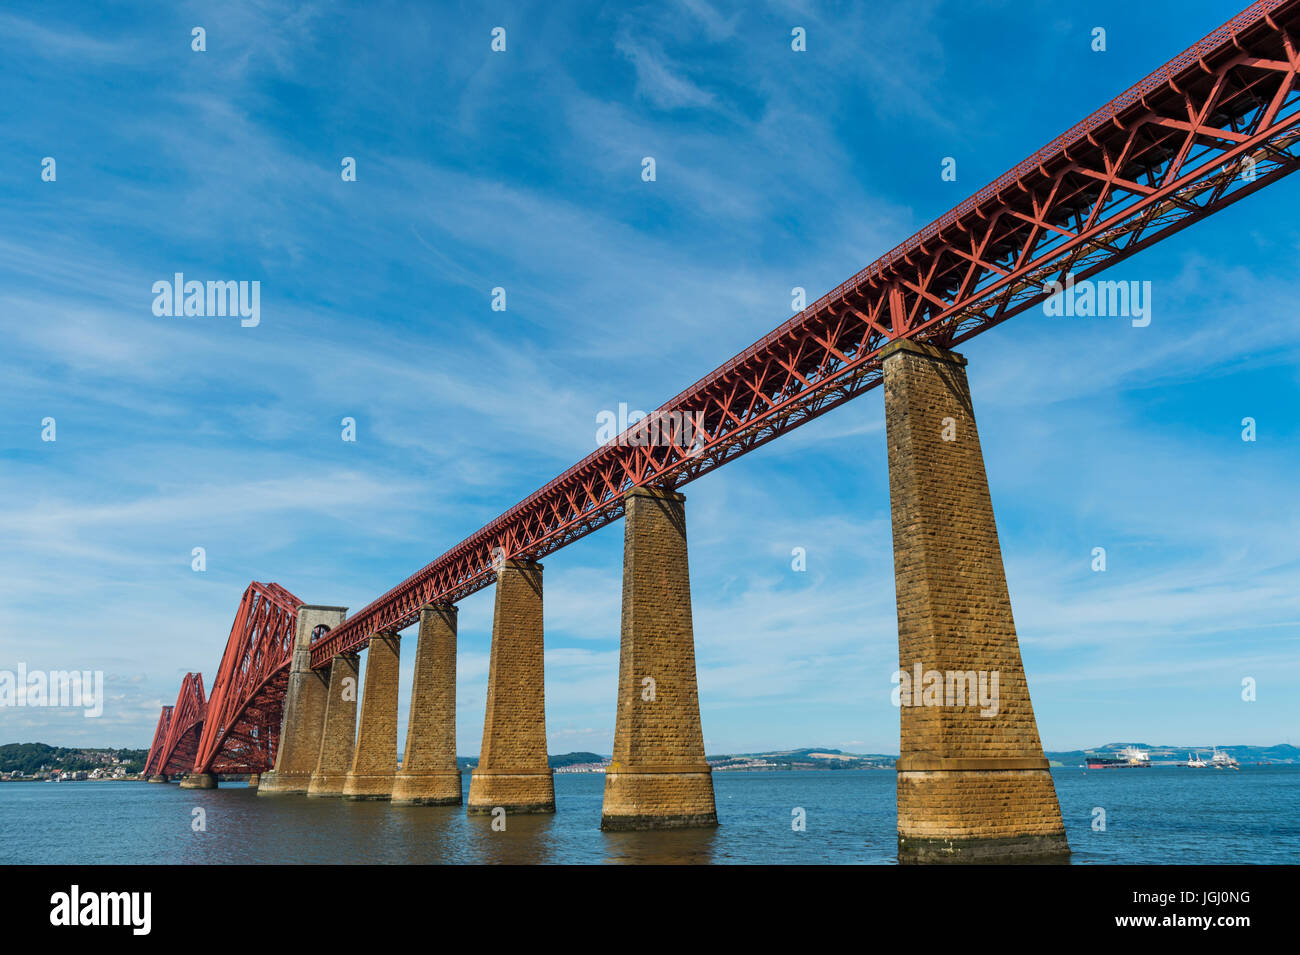 Queensferry, Scotland, Uk - August 15, 2016: The Forth Rail Bridge over the Firth of Forth, South Queensferry. Stock Photo